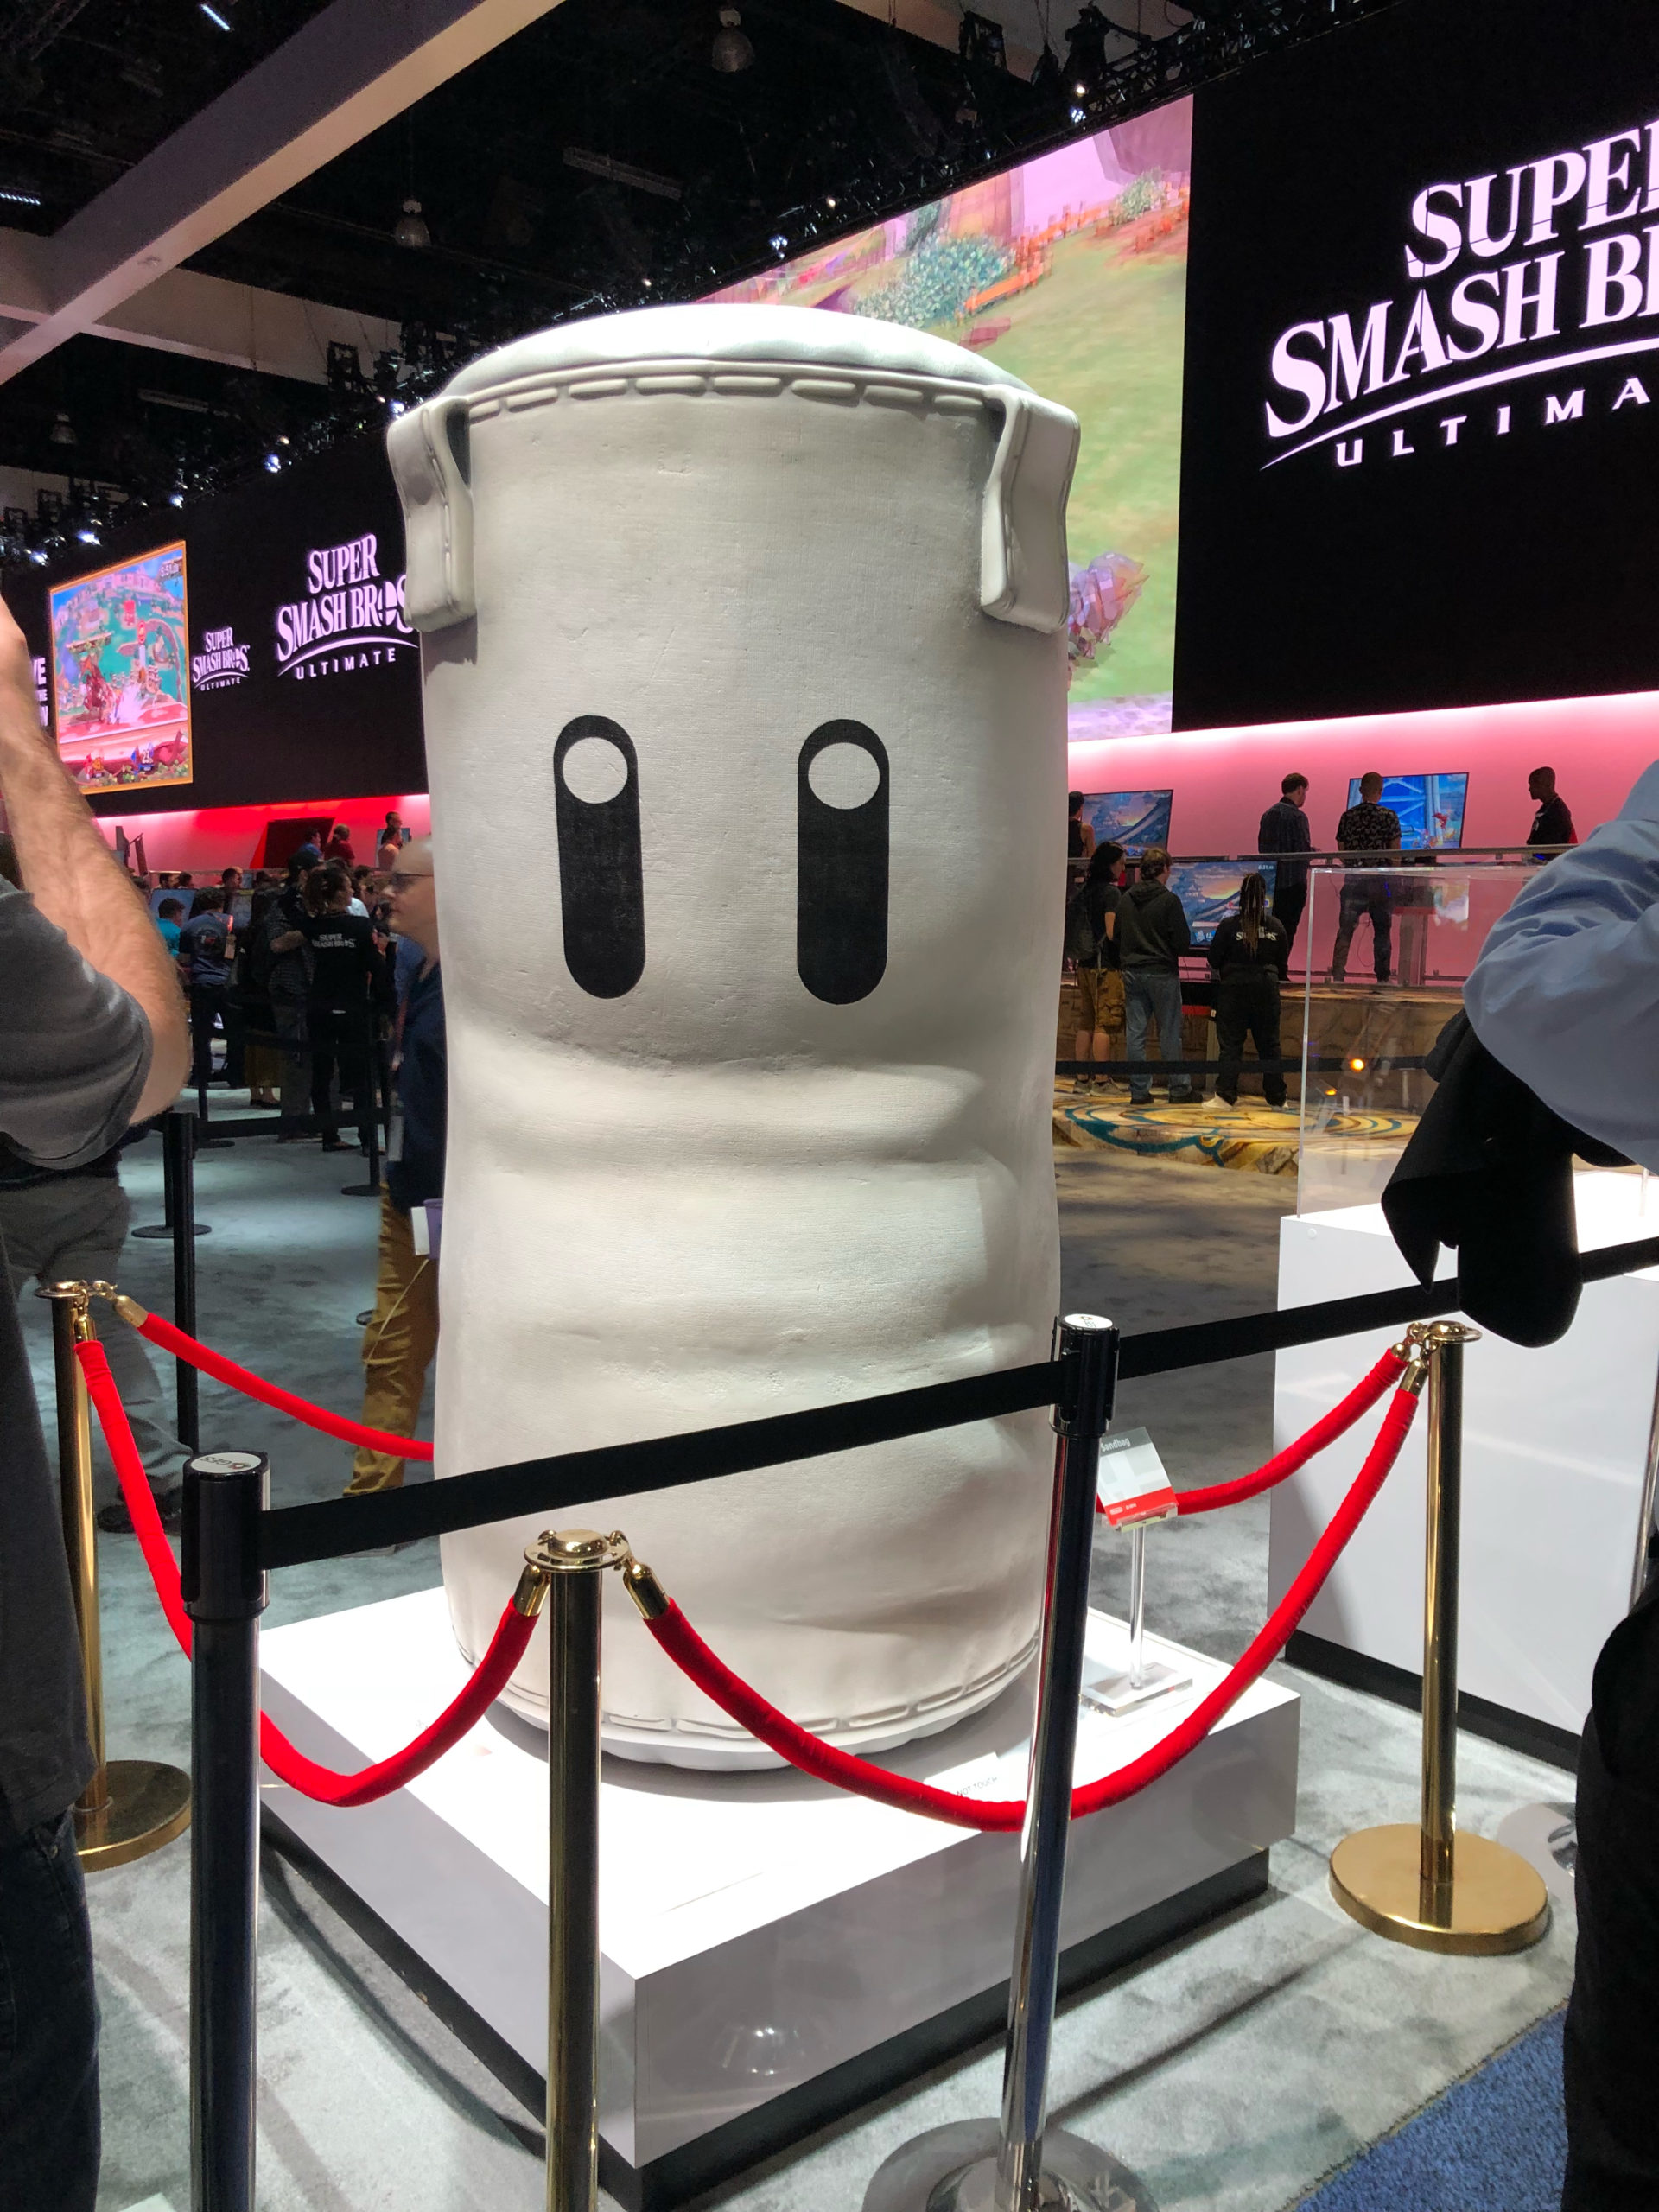 Nintendo’s E3 Booth Is Full Of Amazing Smash Bros. Props